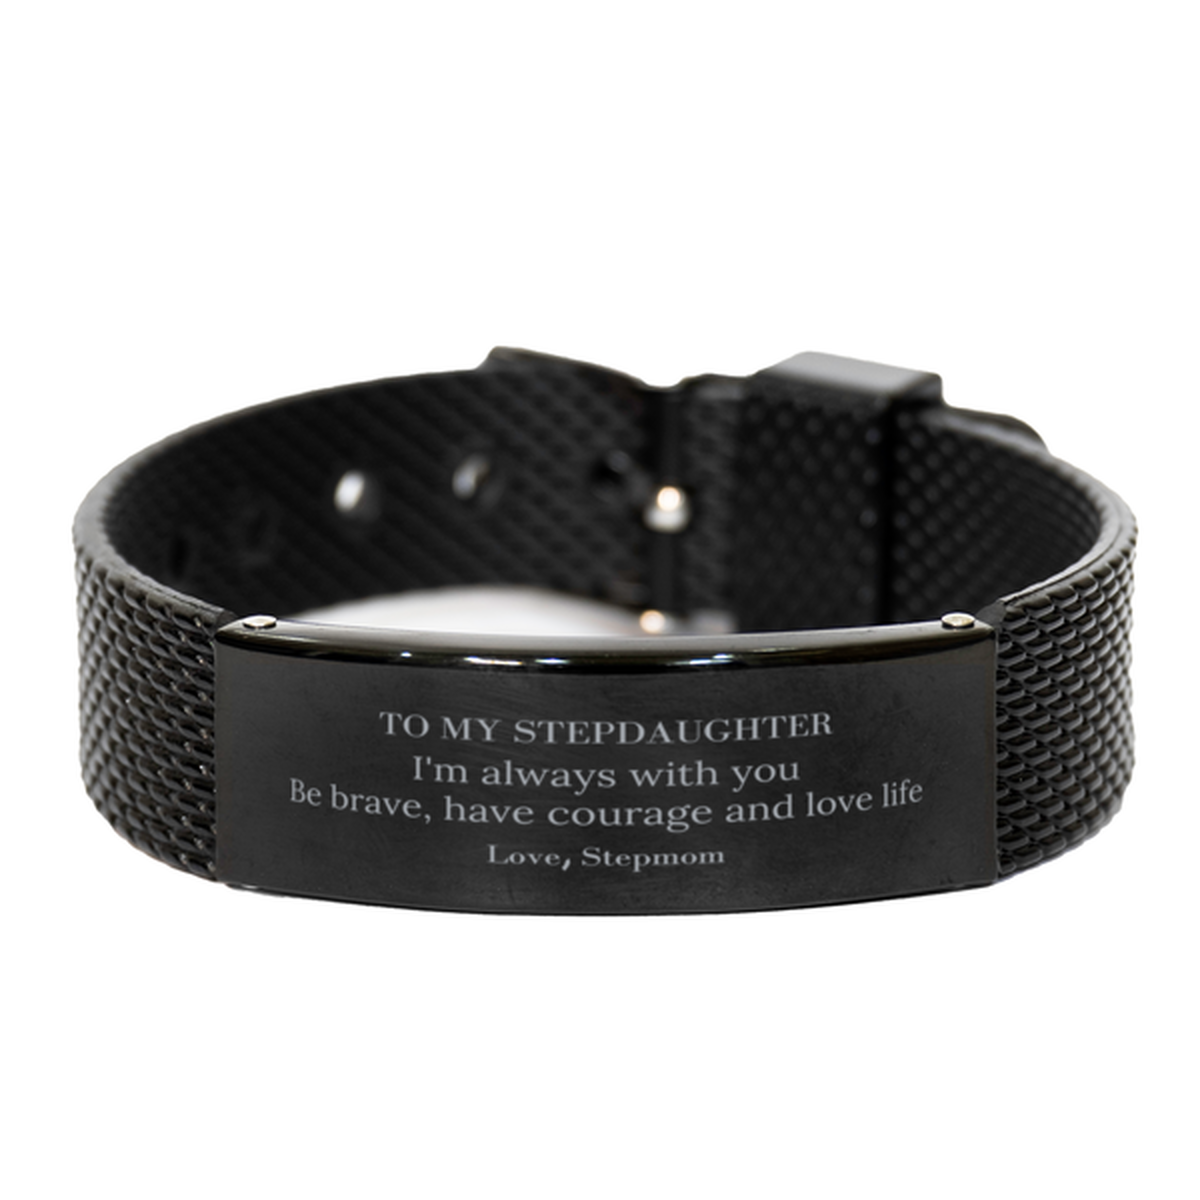 To My Stepdaughter Gifts from Stepmom, Unique Black Shark Mesh Bracelet Inspirational Christmas Birthday Graduation Gifts for Stepdaughter I'm always with you. Be brave, have courage and love life. Love, Stepmom